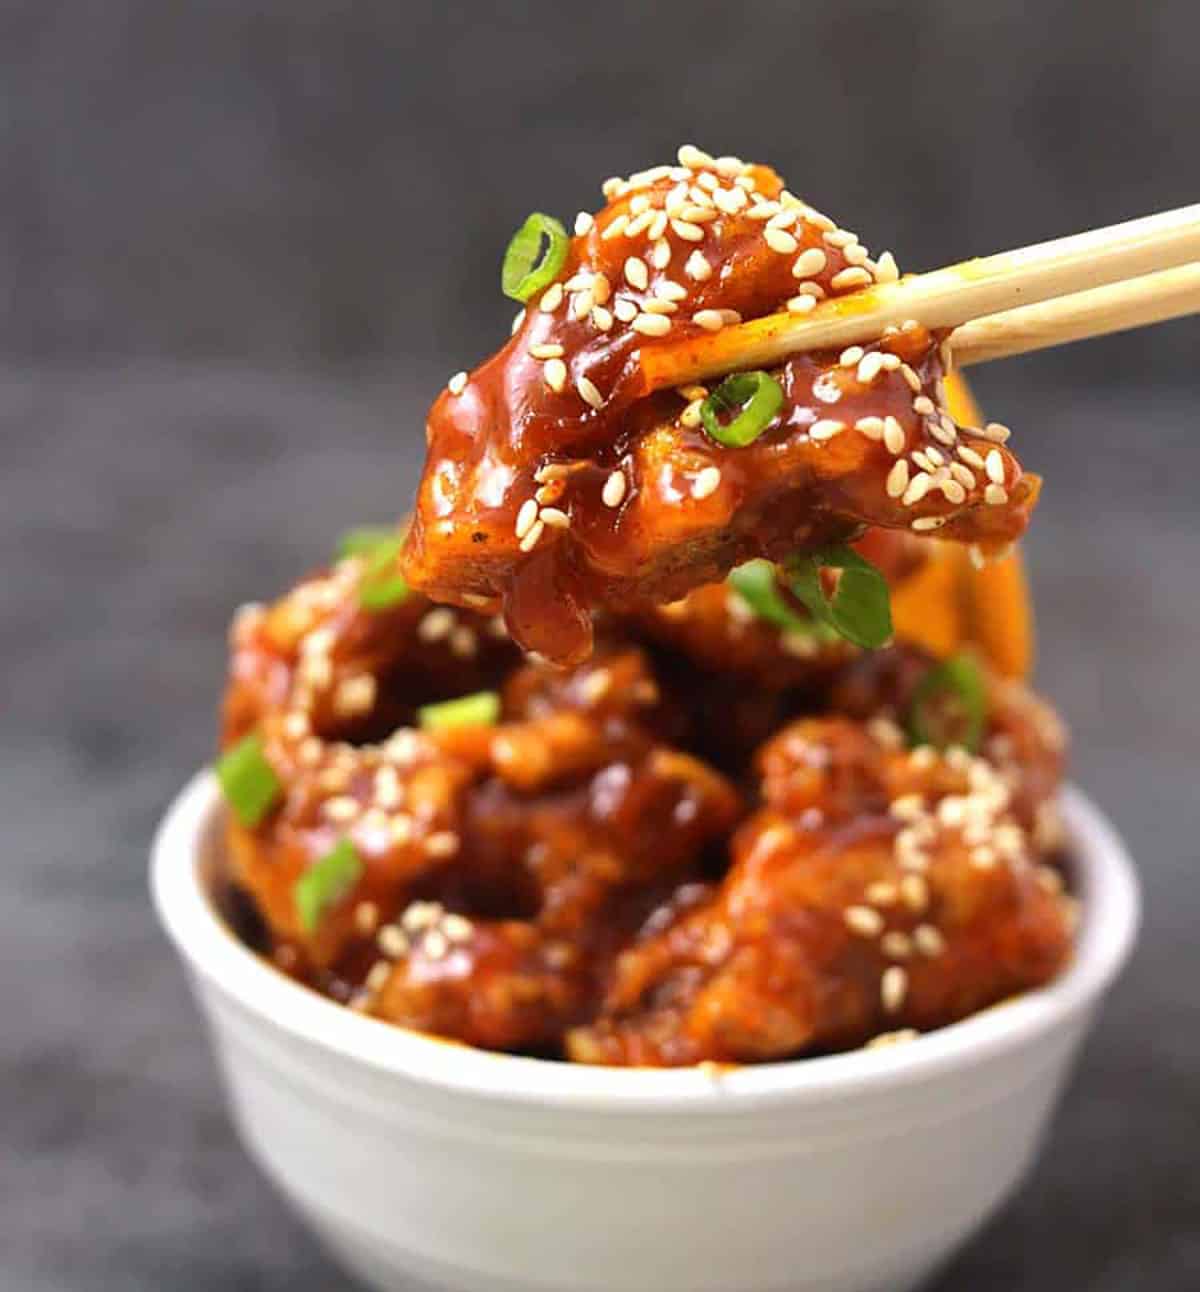 Orange chicken garnished with scallions and toasted sesame seeds picked using a pair of chopsticks. A white bowl containing orange chicken in the background.